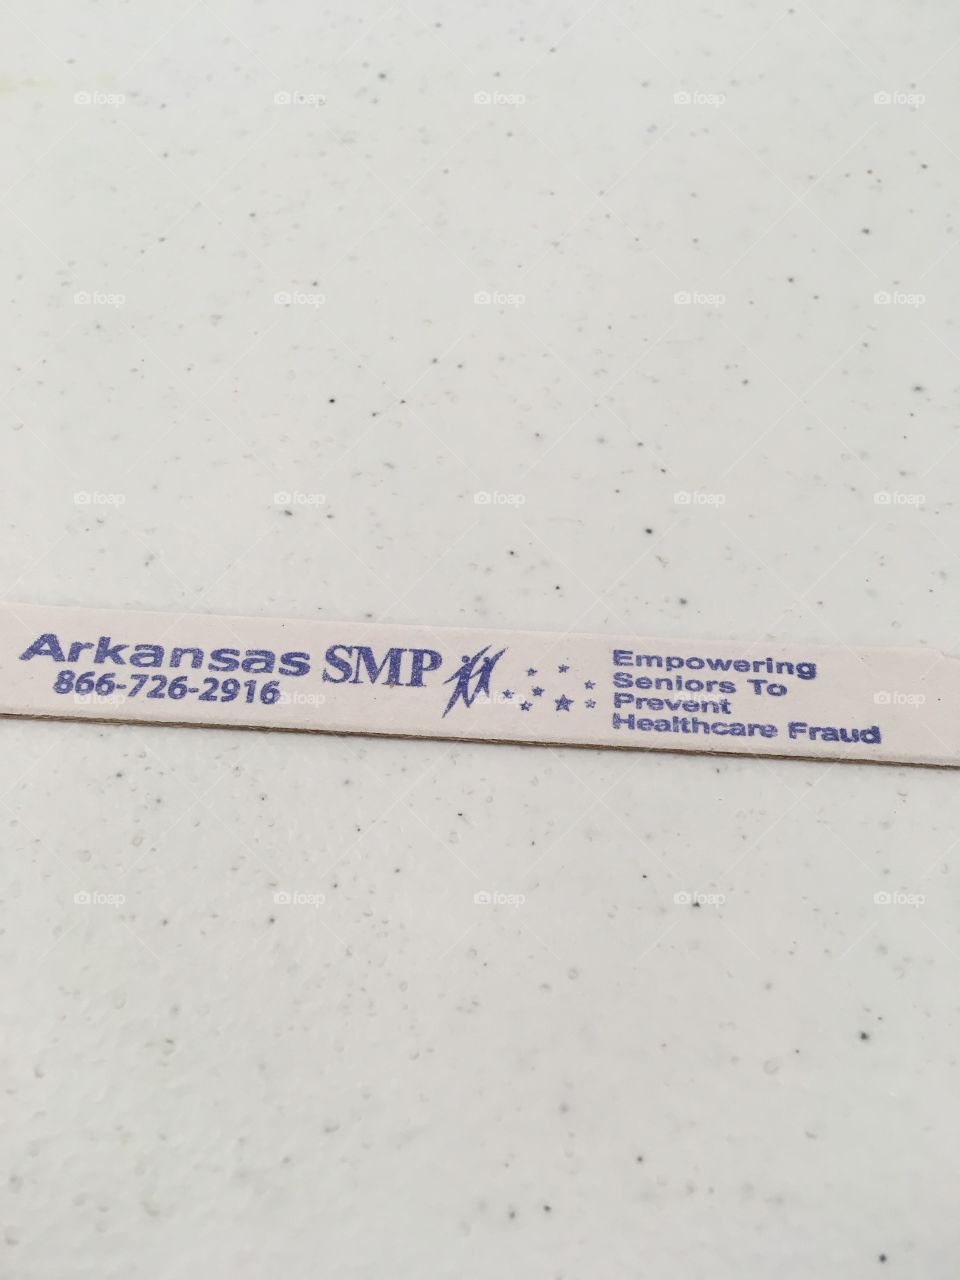 Arkansas amp protects seniors from fraud. Info stamped on an Emory board. How convenient 